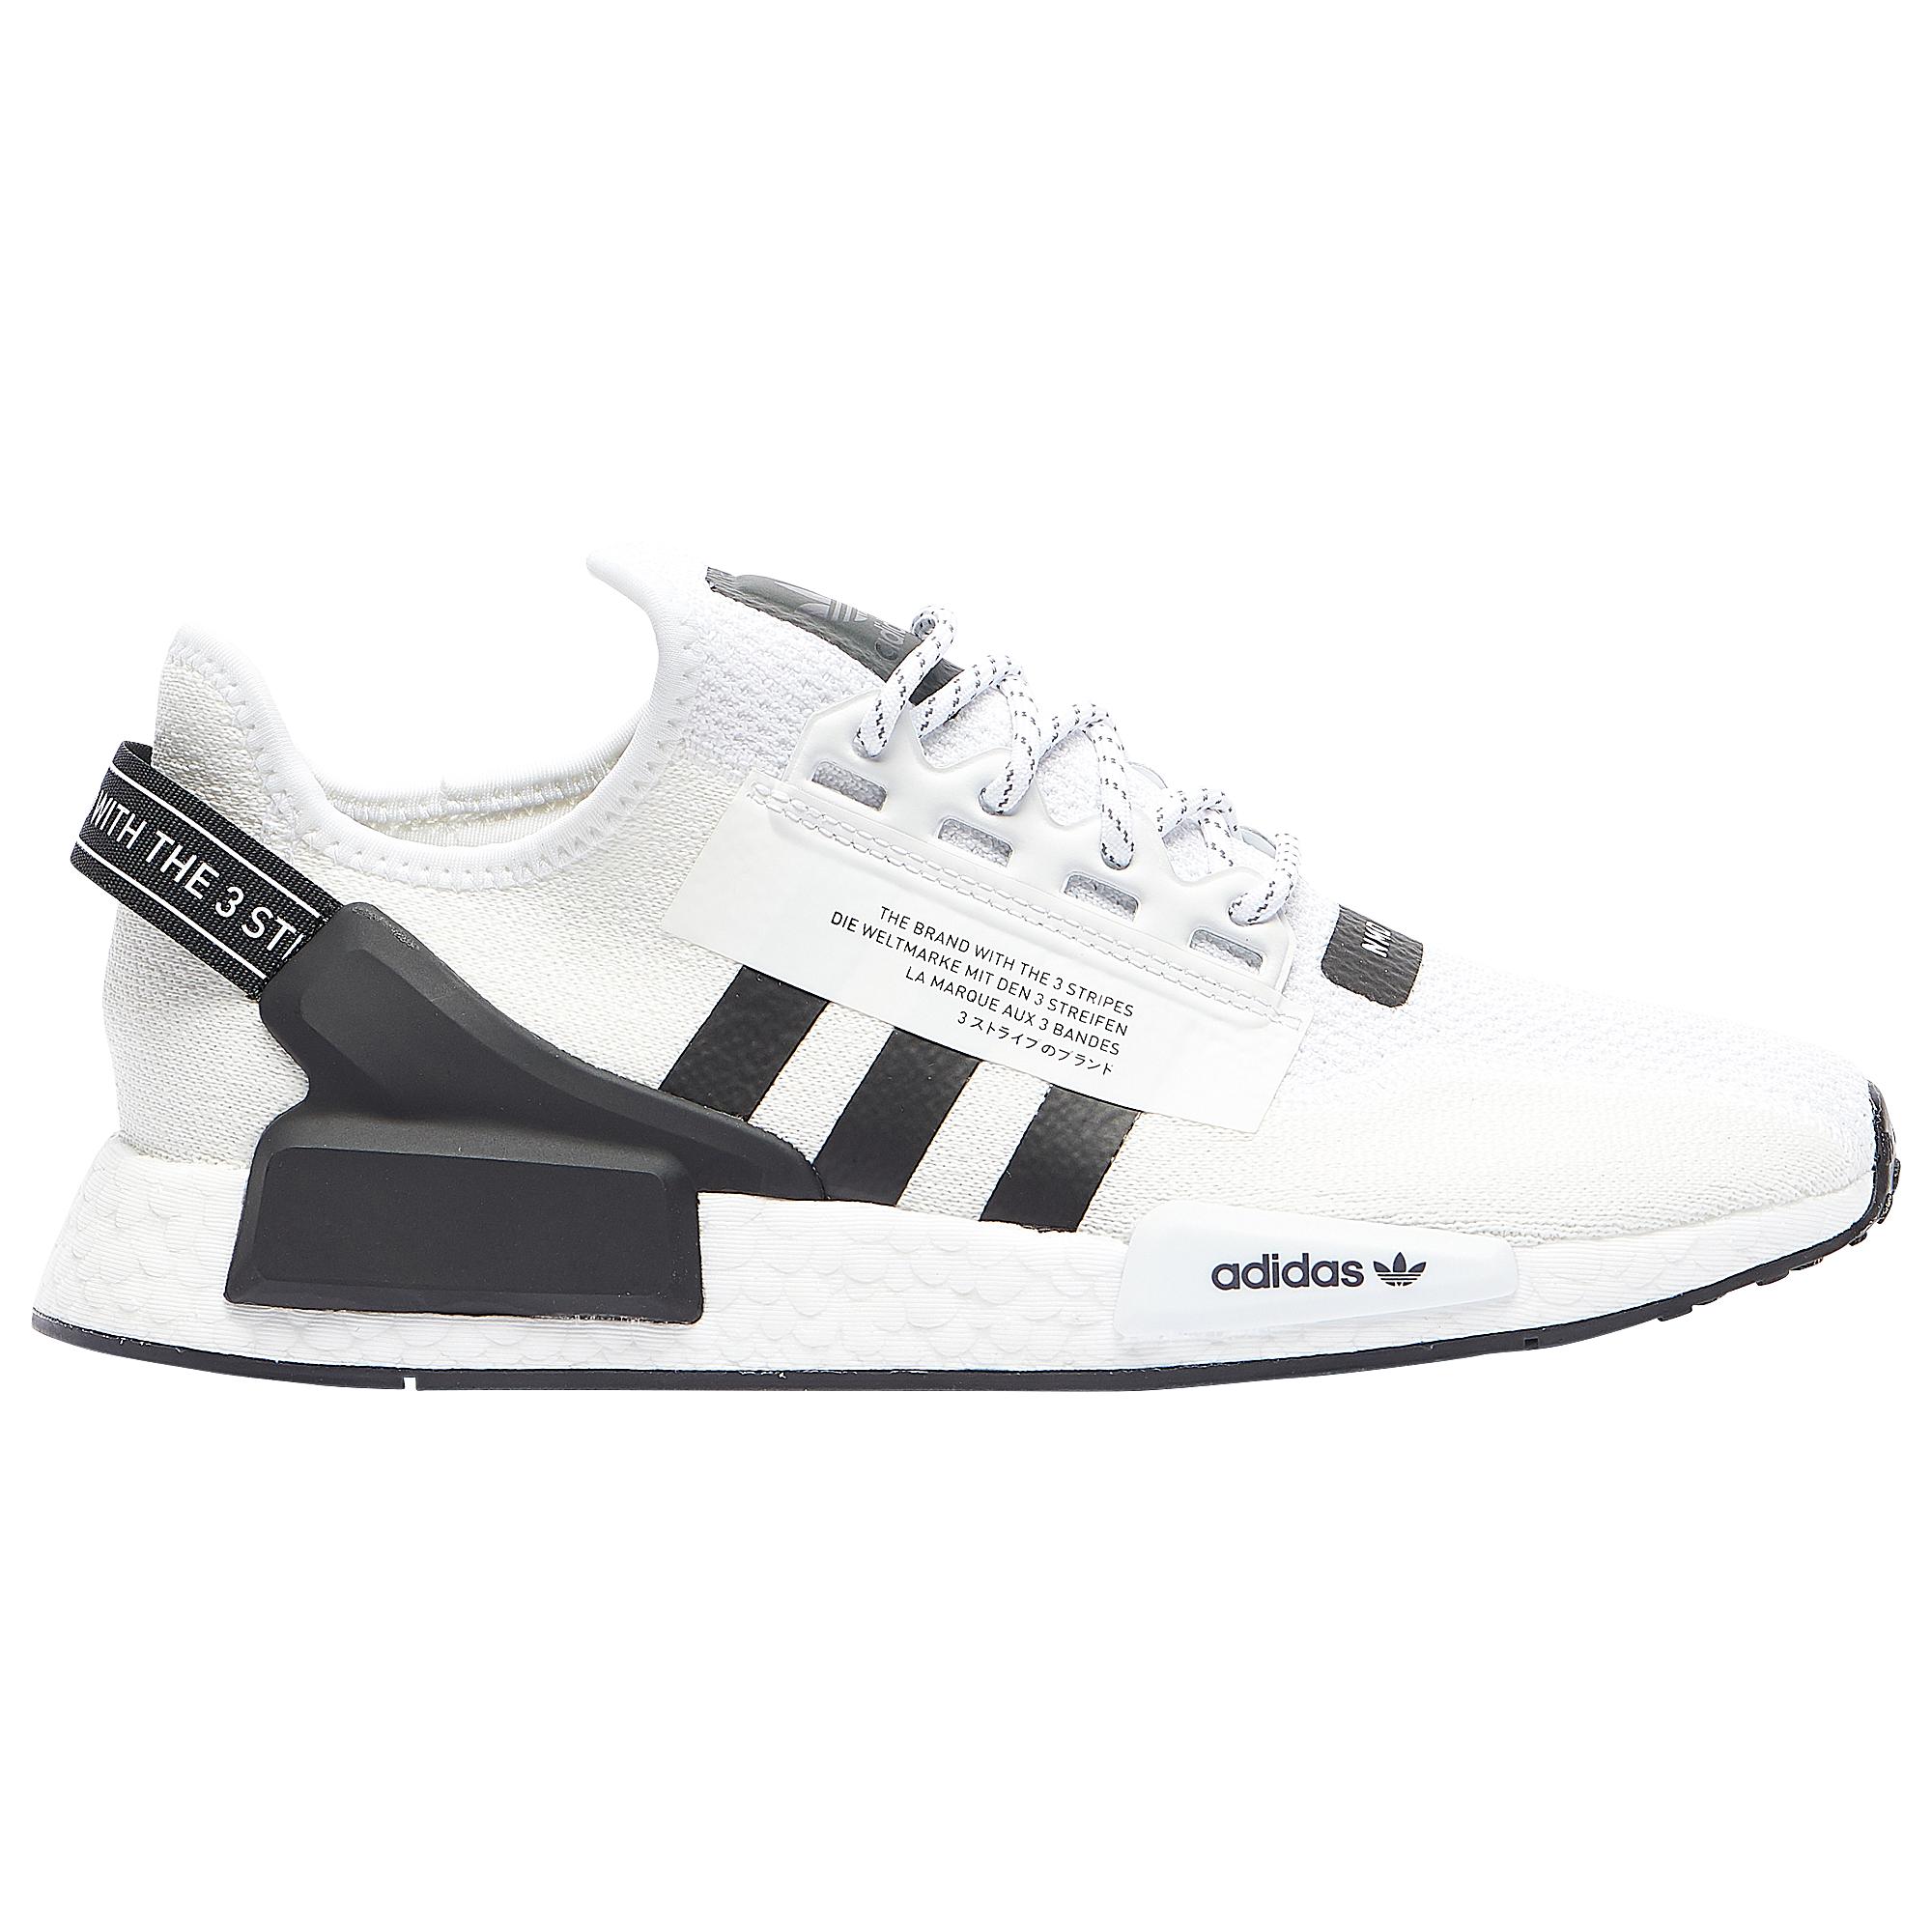 adidas nmd r1 white and black